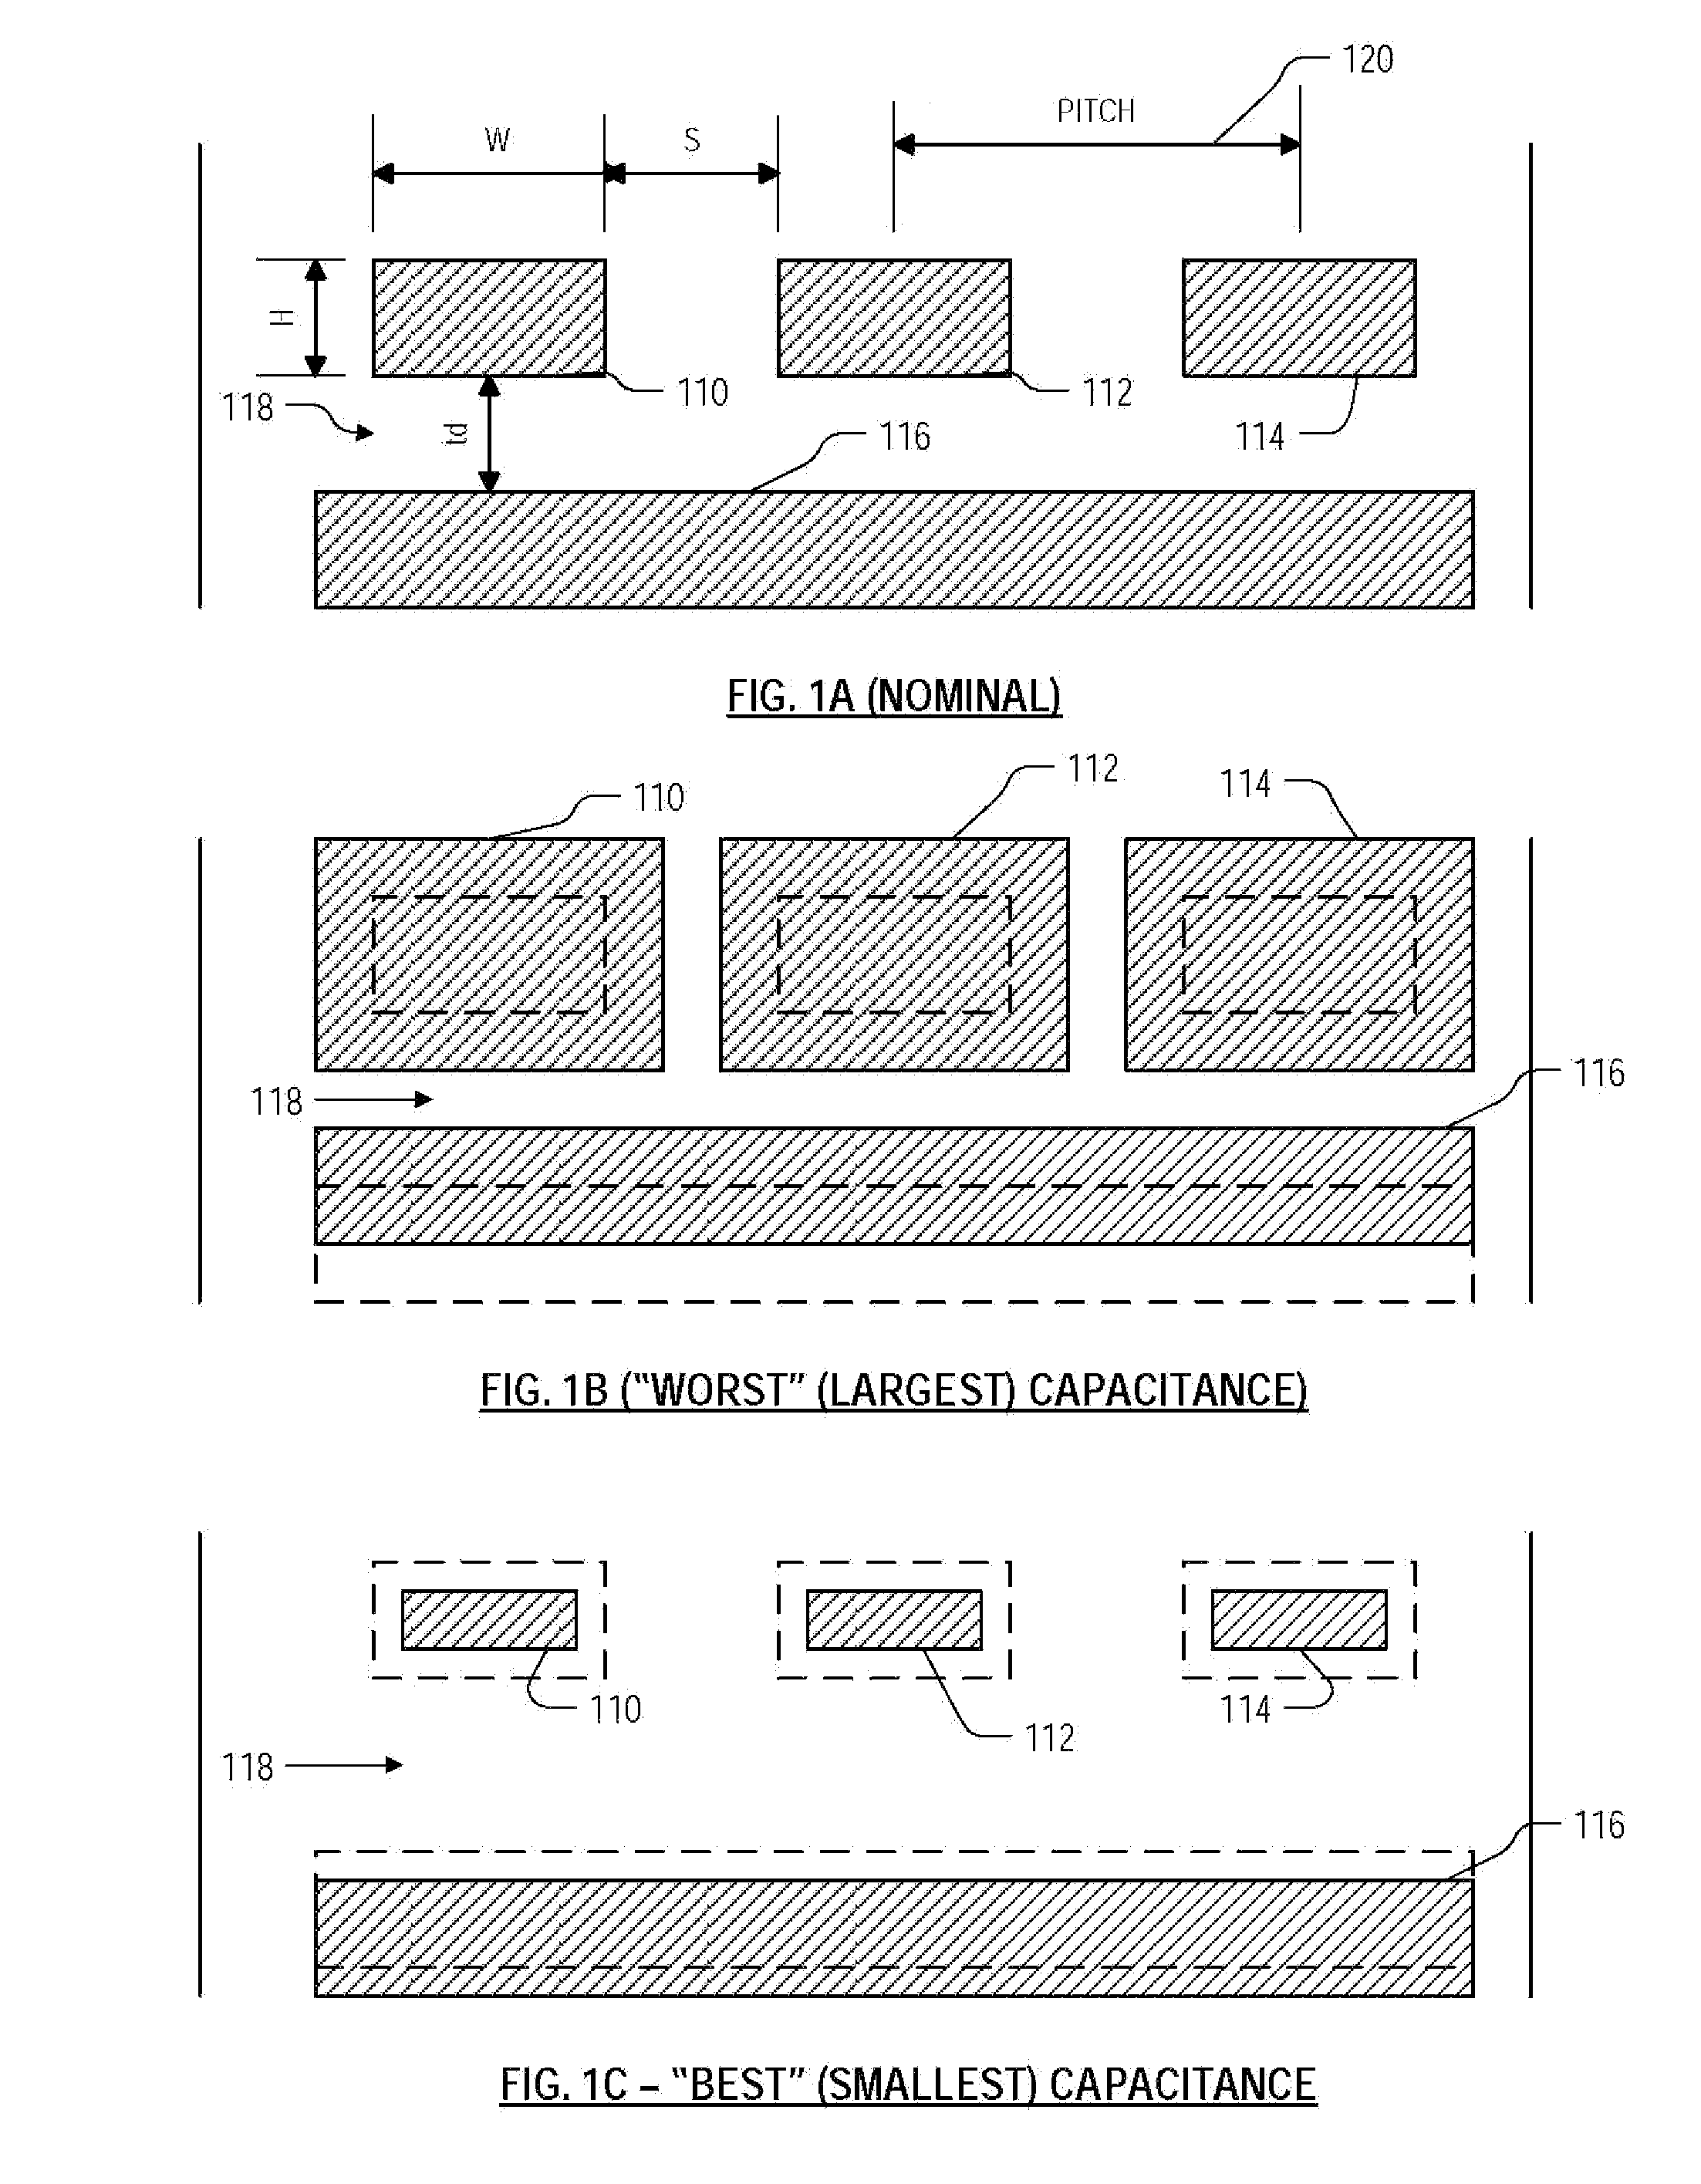 Method for determining best and worst cases for interconnects in timing analysis